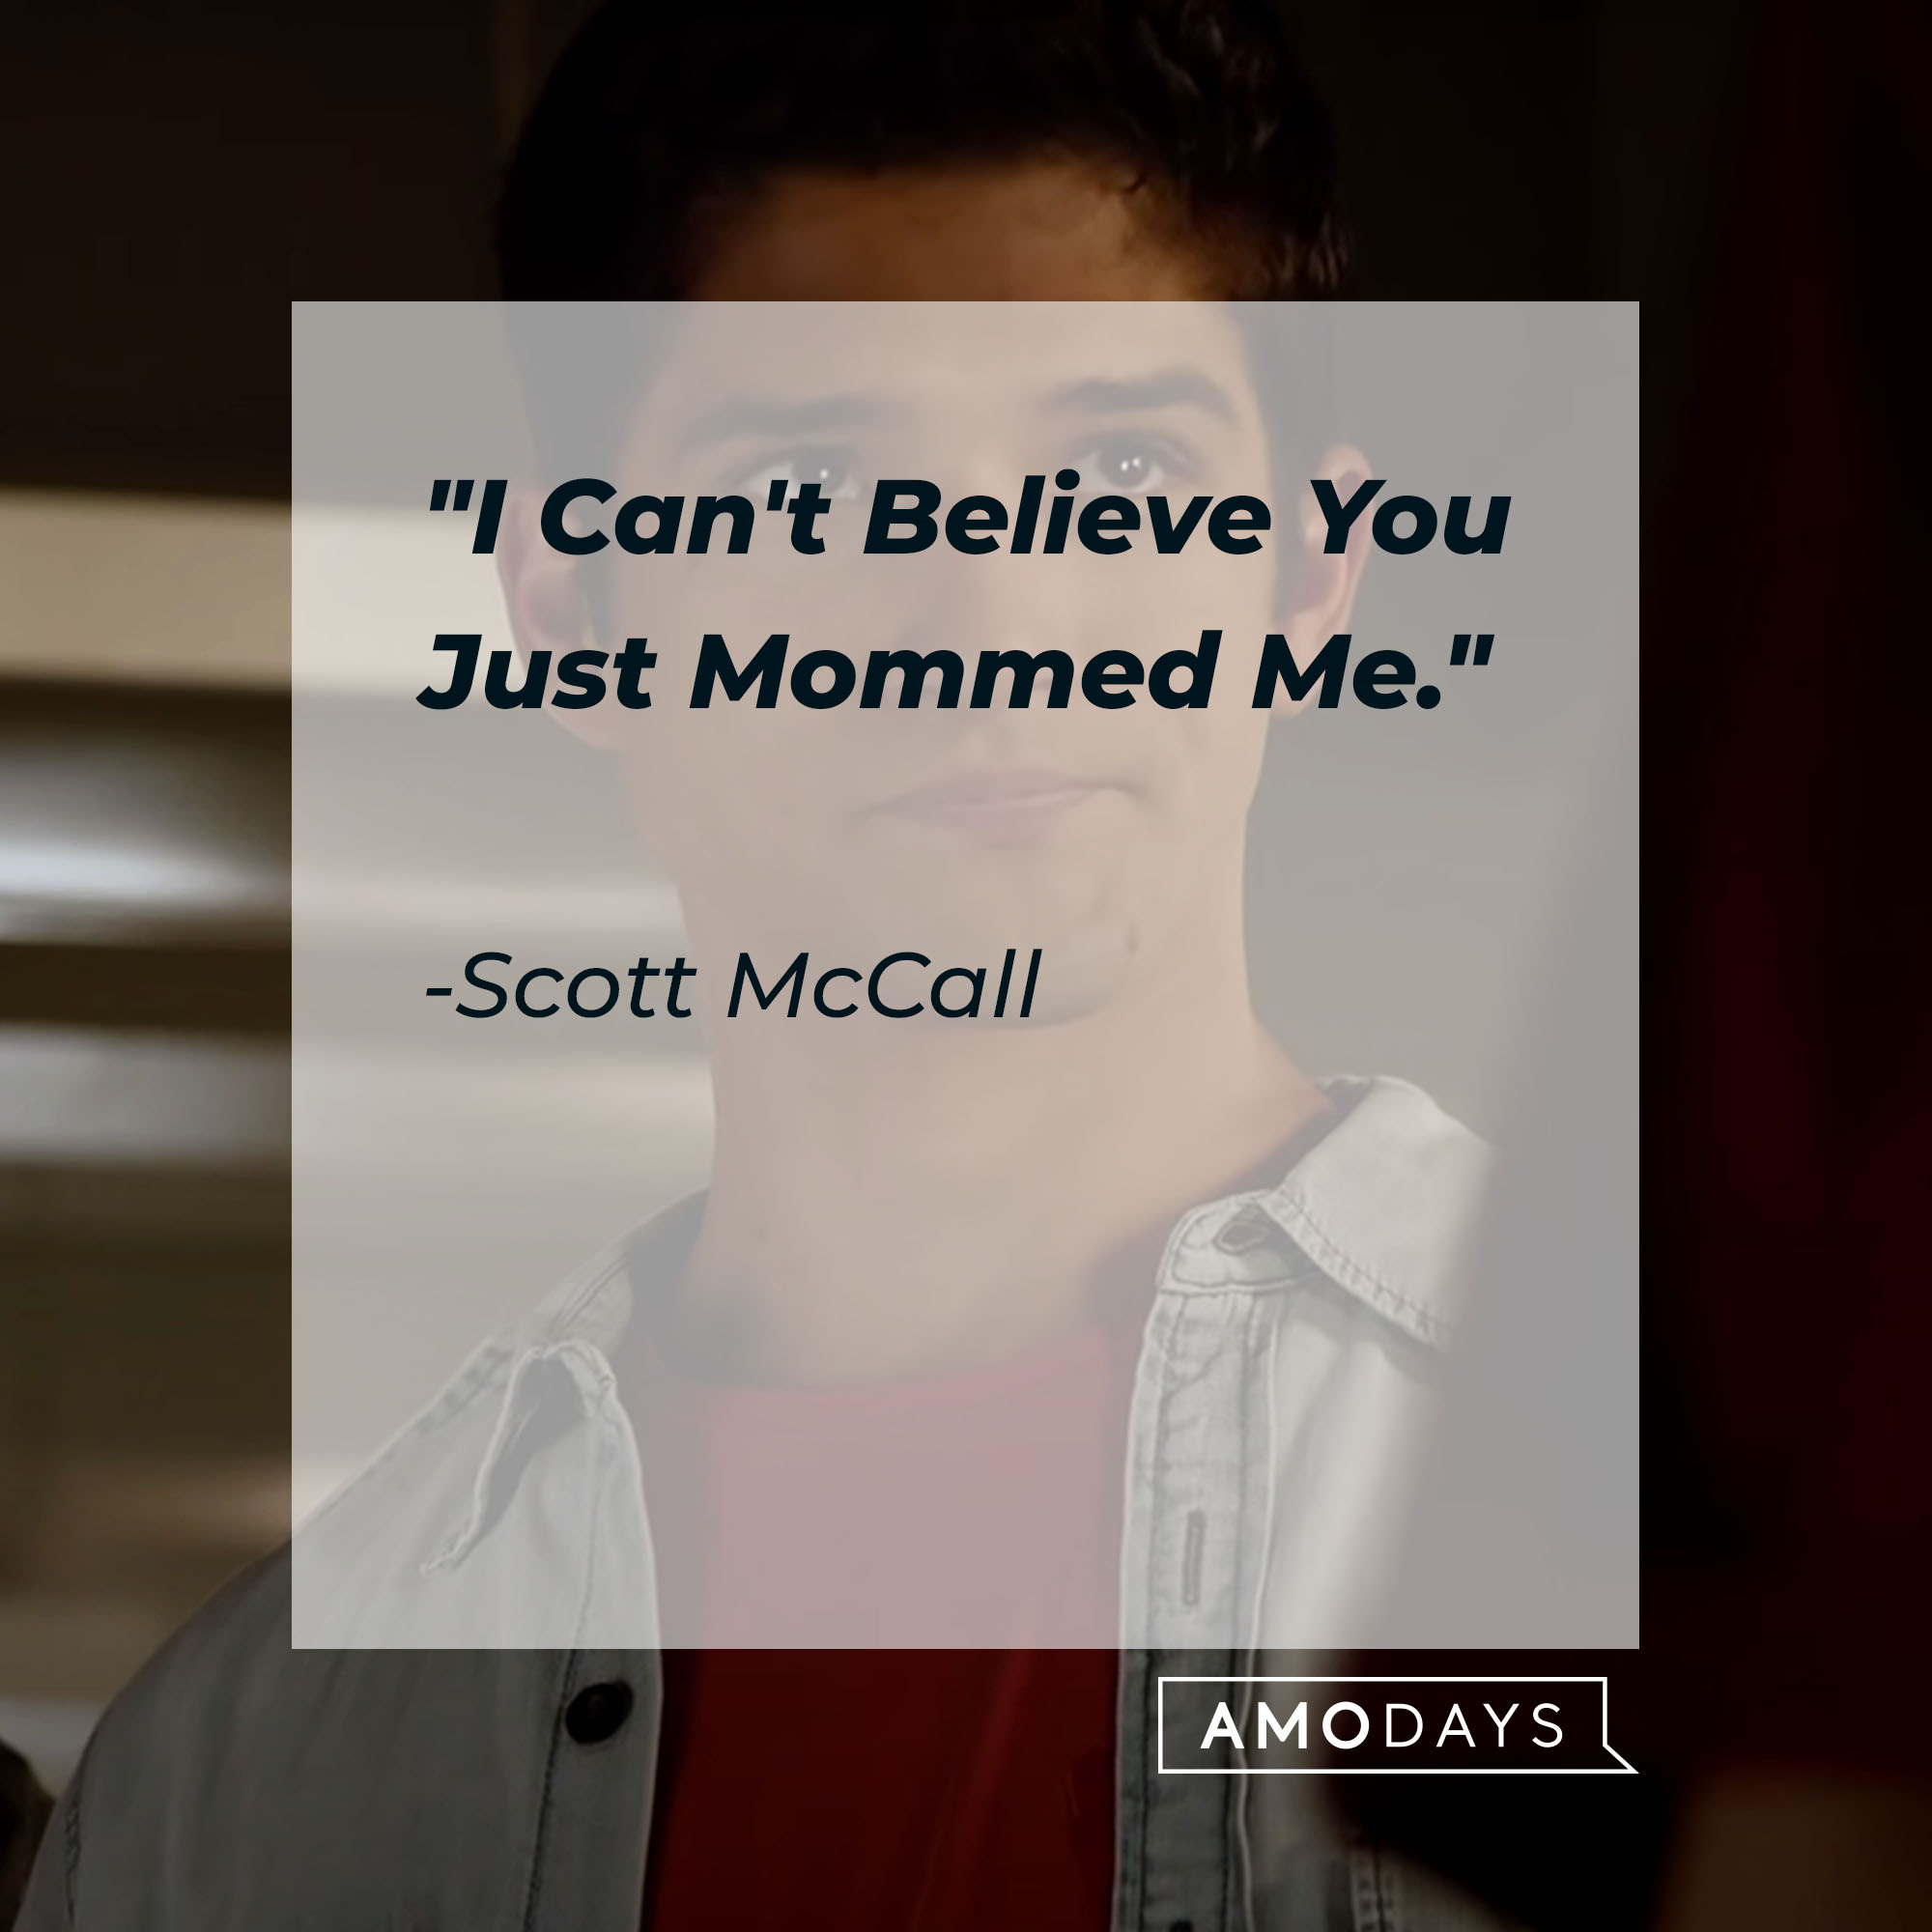 Scott McCall's quote: "I Can't Believe You Just Mommed Me" | Source: Youtube.com/WolfWatch